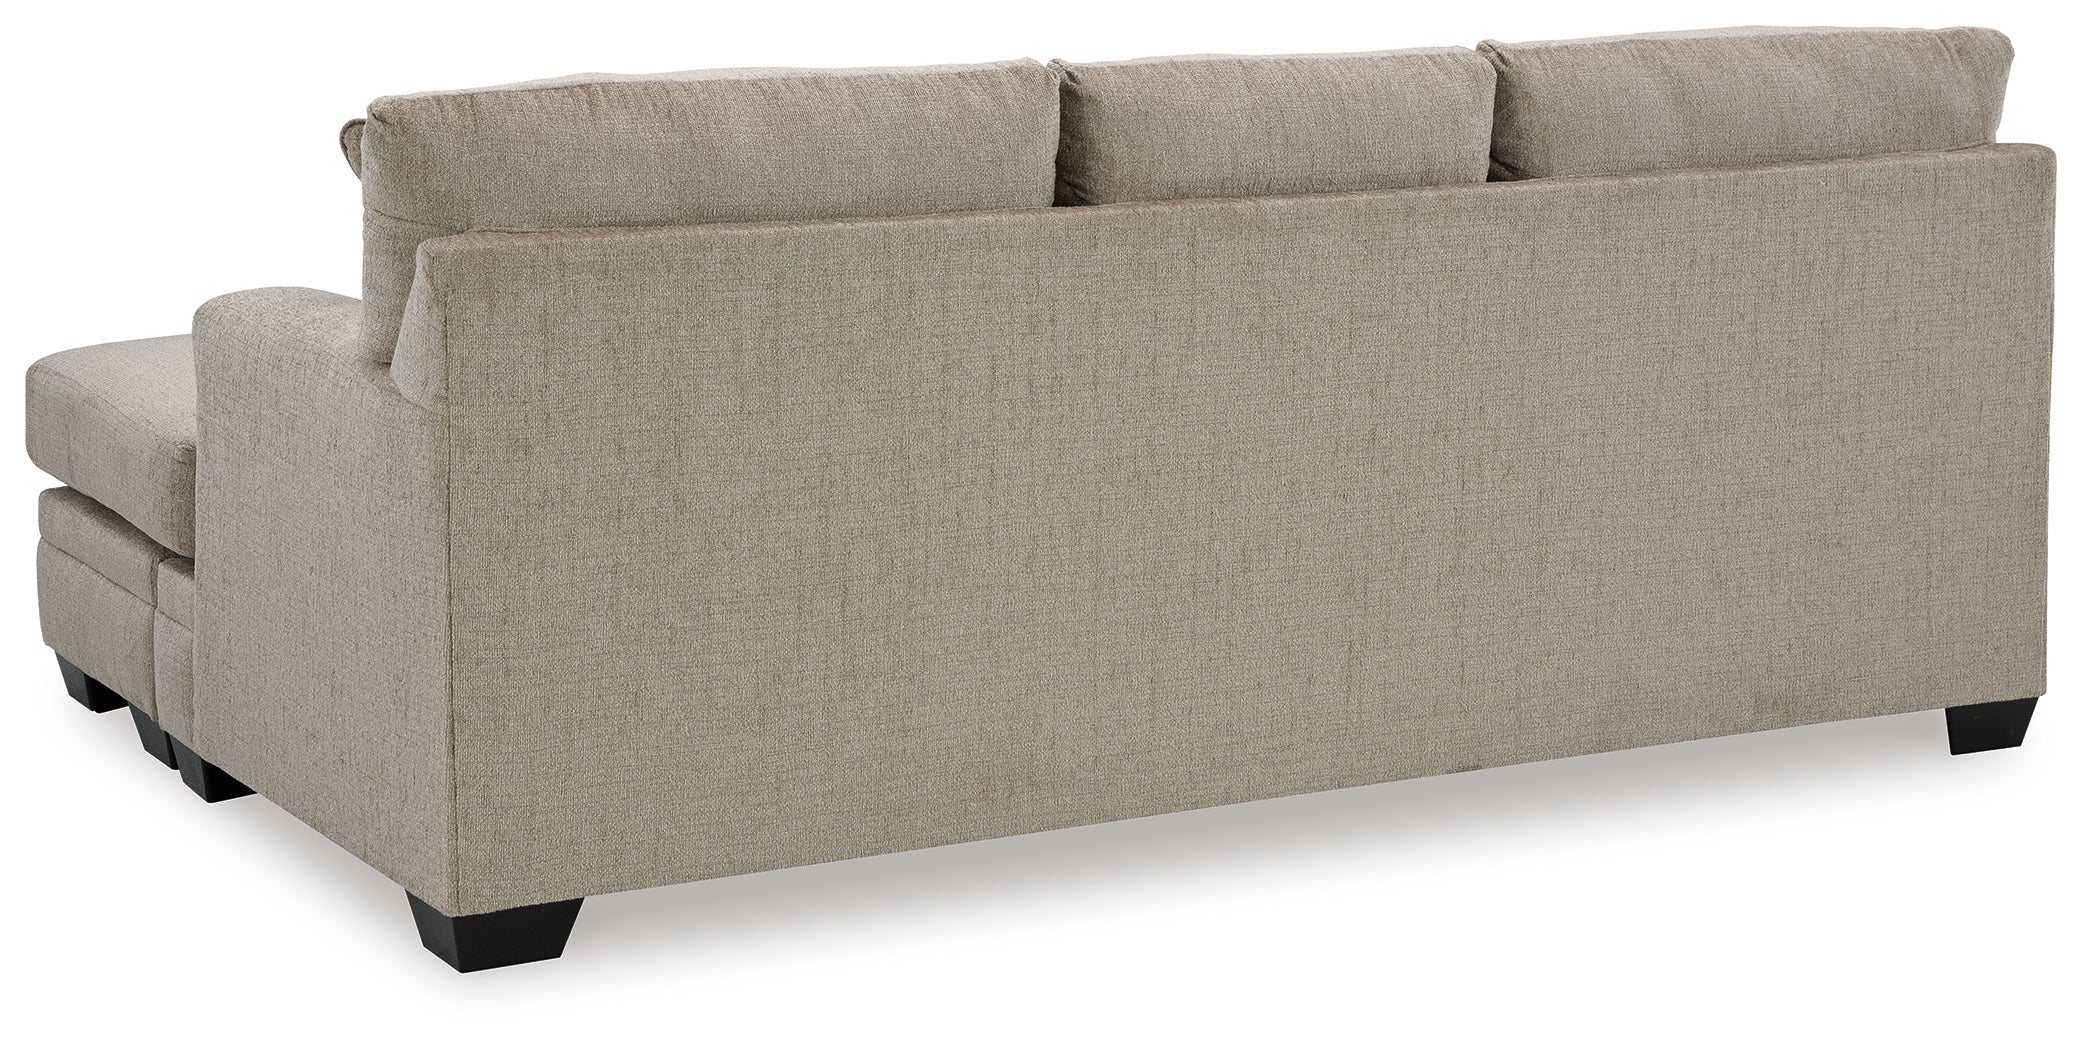 Stonemeade Taupe Sofa Chaise - 5950418 - Bien Home Furniture &amp; Electronics